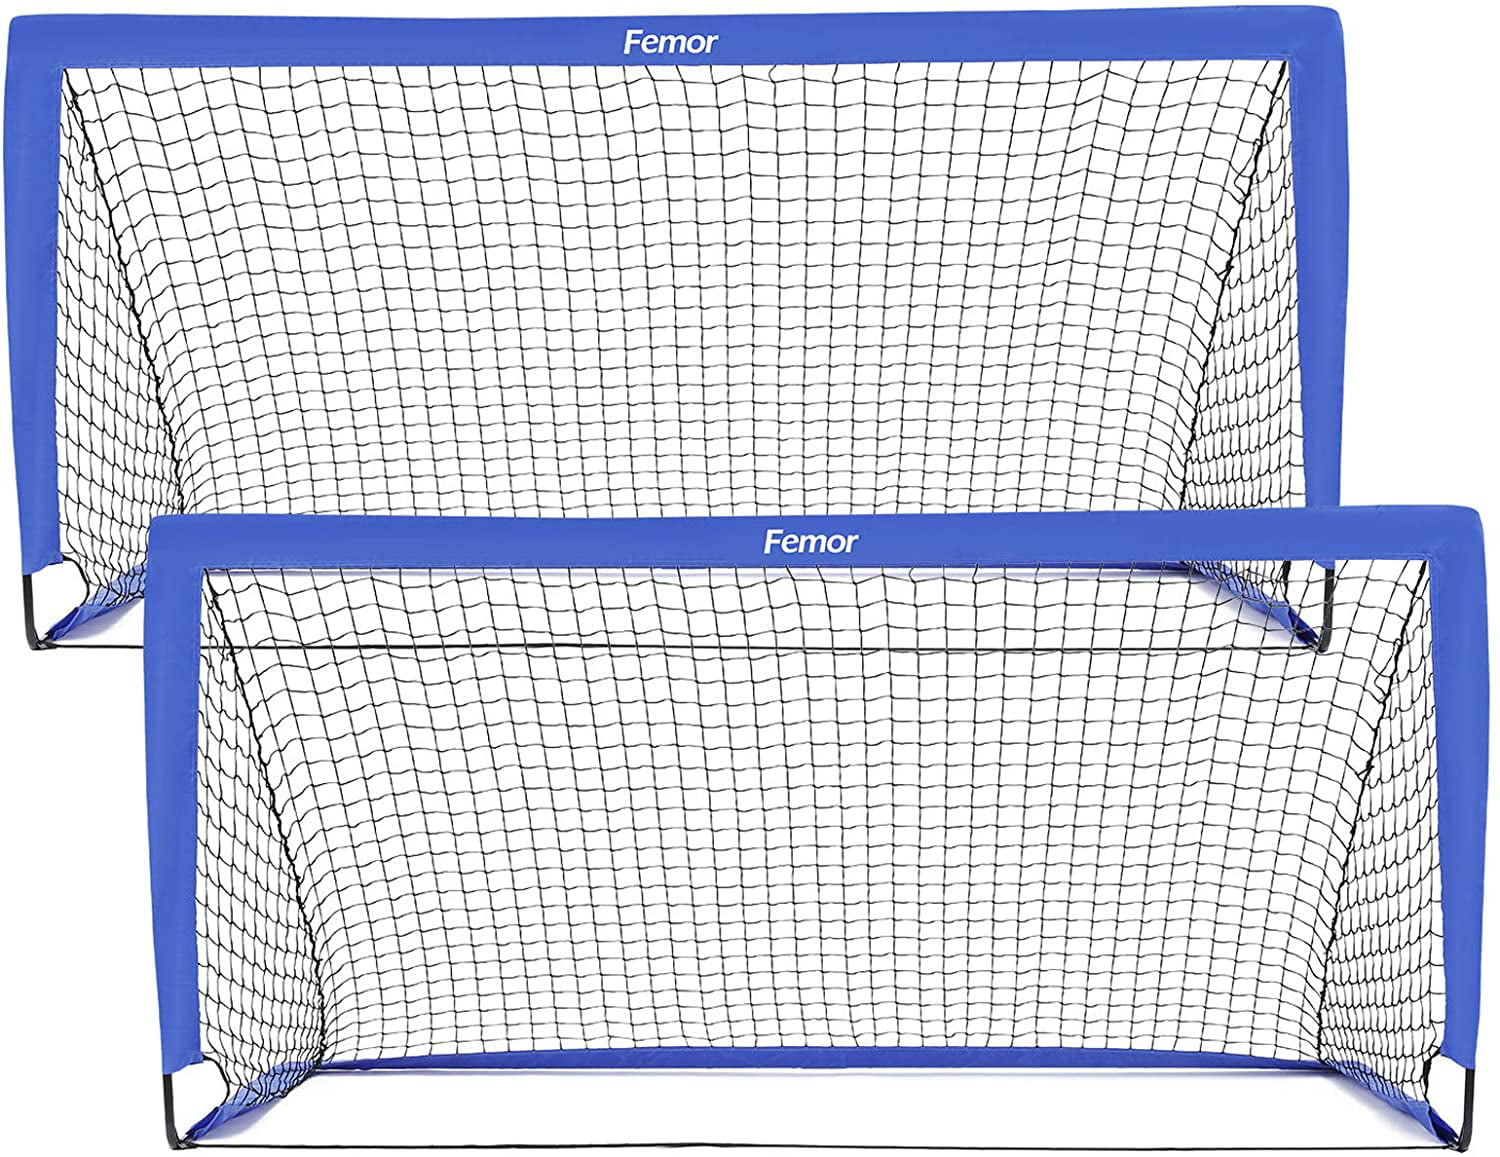 femor Portable Soccer Goal Nets Fold-Up Soccer Target Goal with Carrying Bag for Kids and Teens Size 6 x 3 Backyard Games and Practice Set of 2 